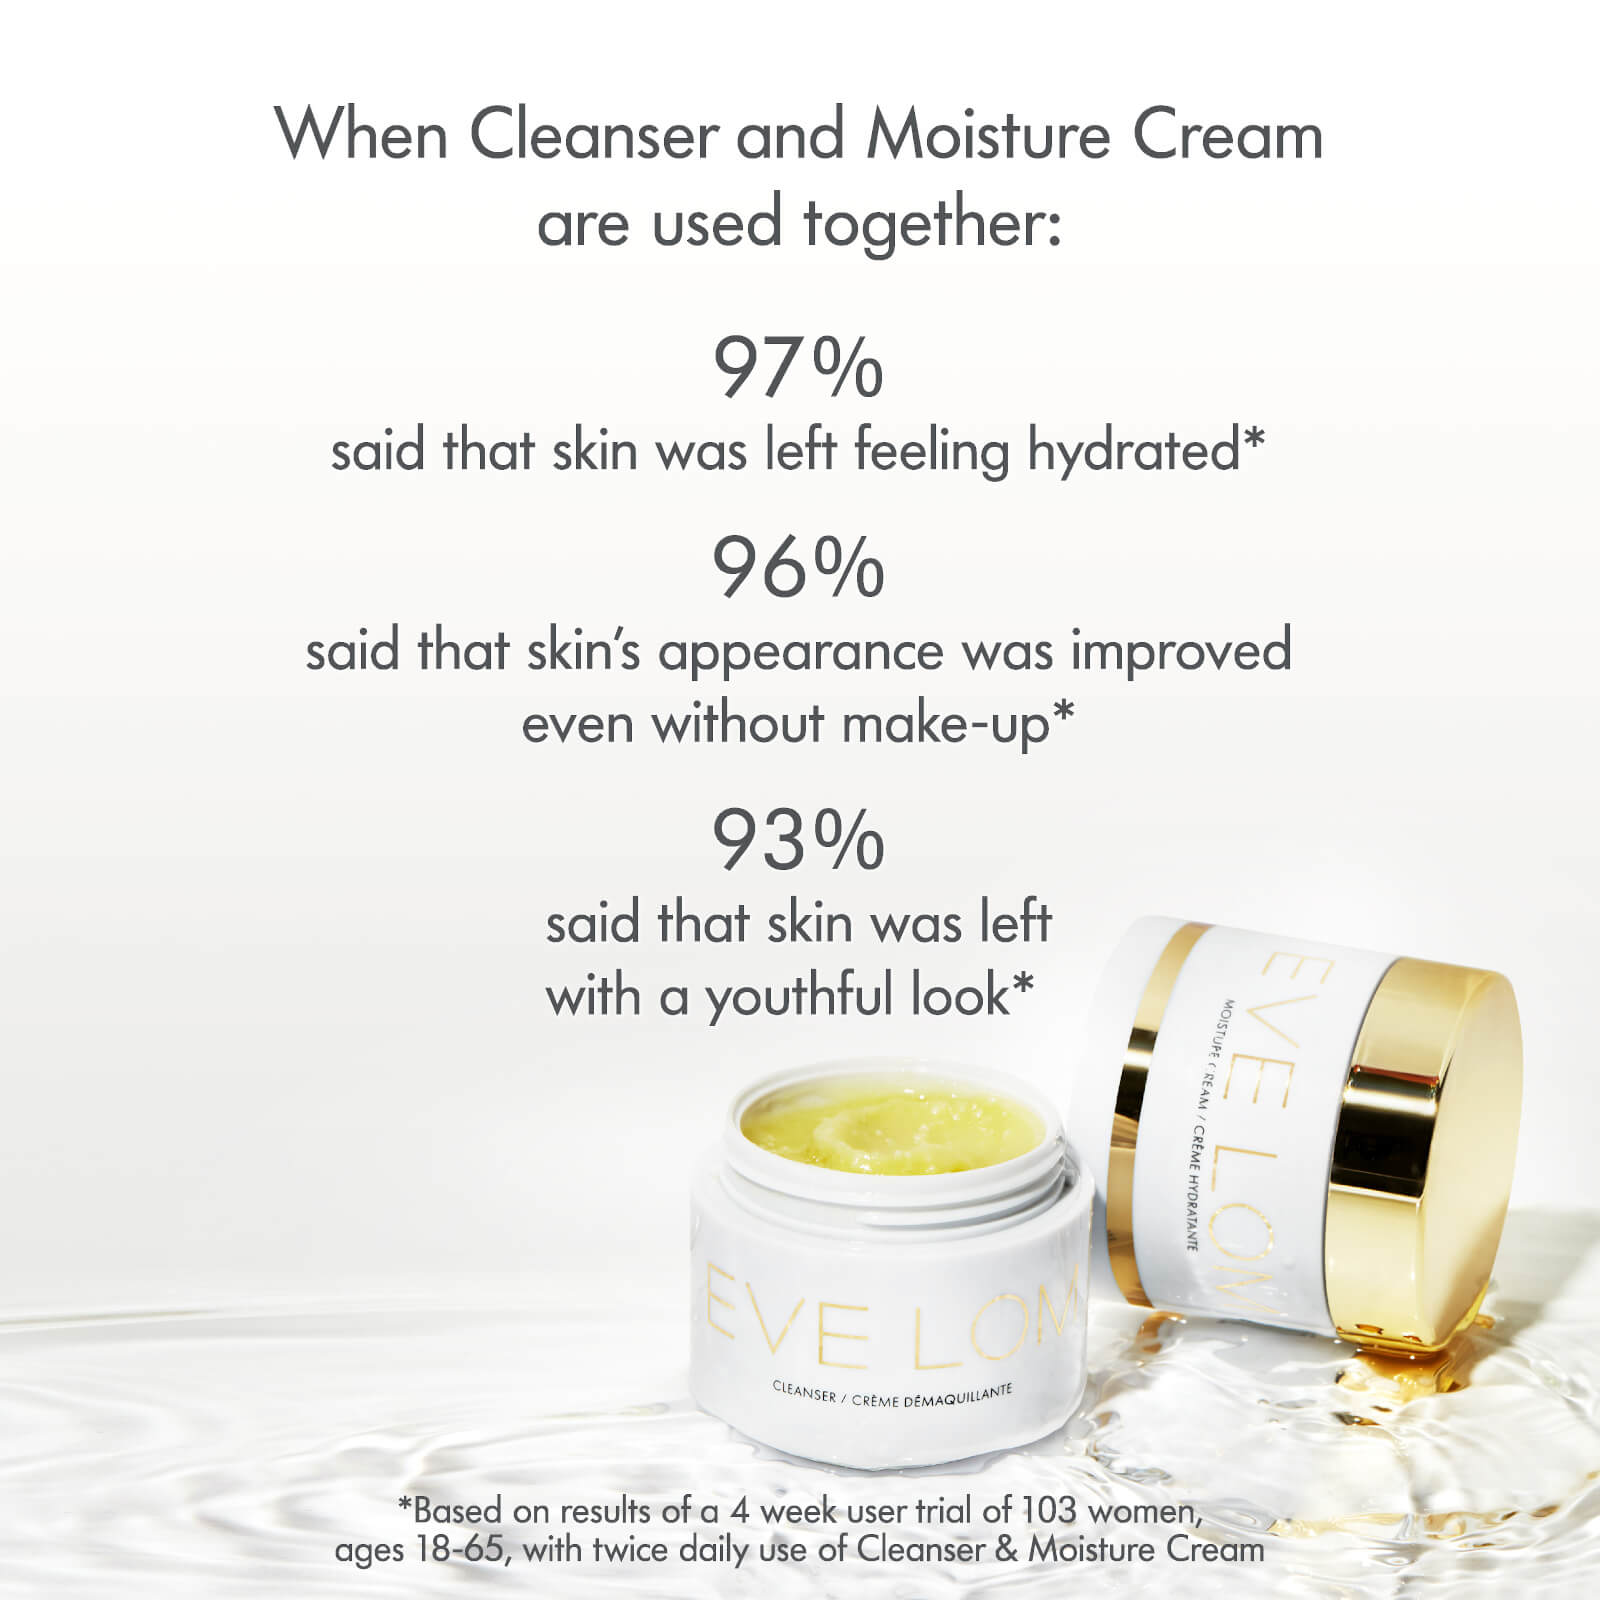 When cleanser and moisture cream are used together: 97% said that skin was left feeling hydrated* 96% said that skin's appearance was improved even without make-up* 93% said that skin was left with a youthful look* *Based on results of a 4 week user trial of 103 women, ages 18-65, with twice daily use of cleanser & moisture cream